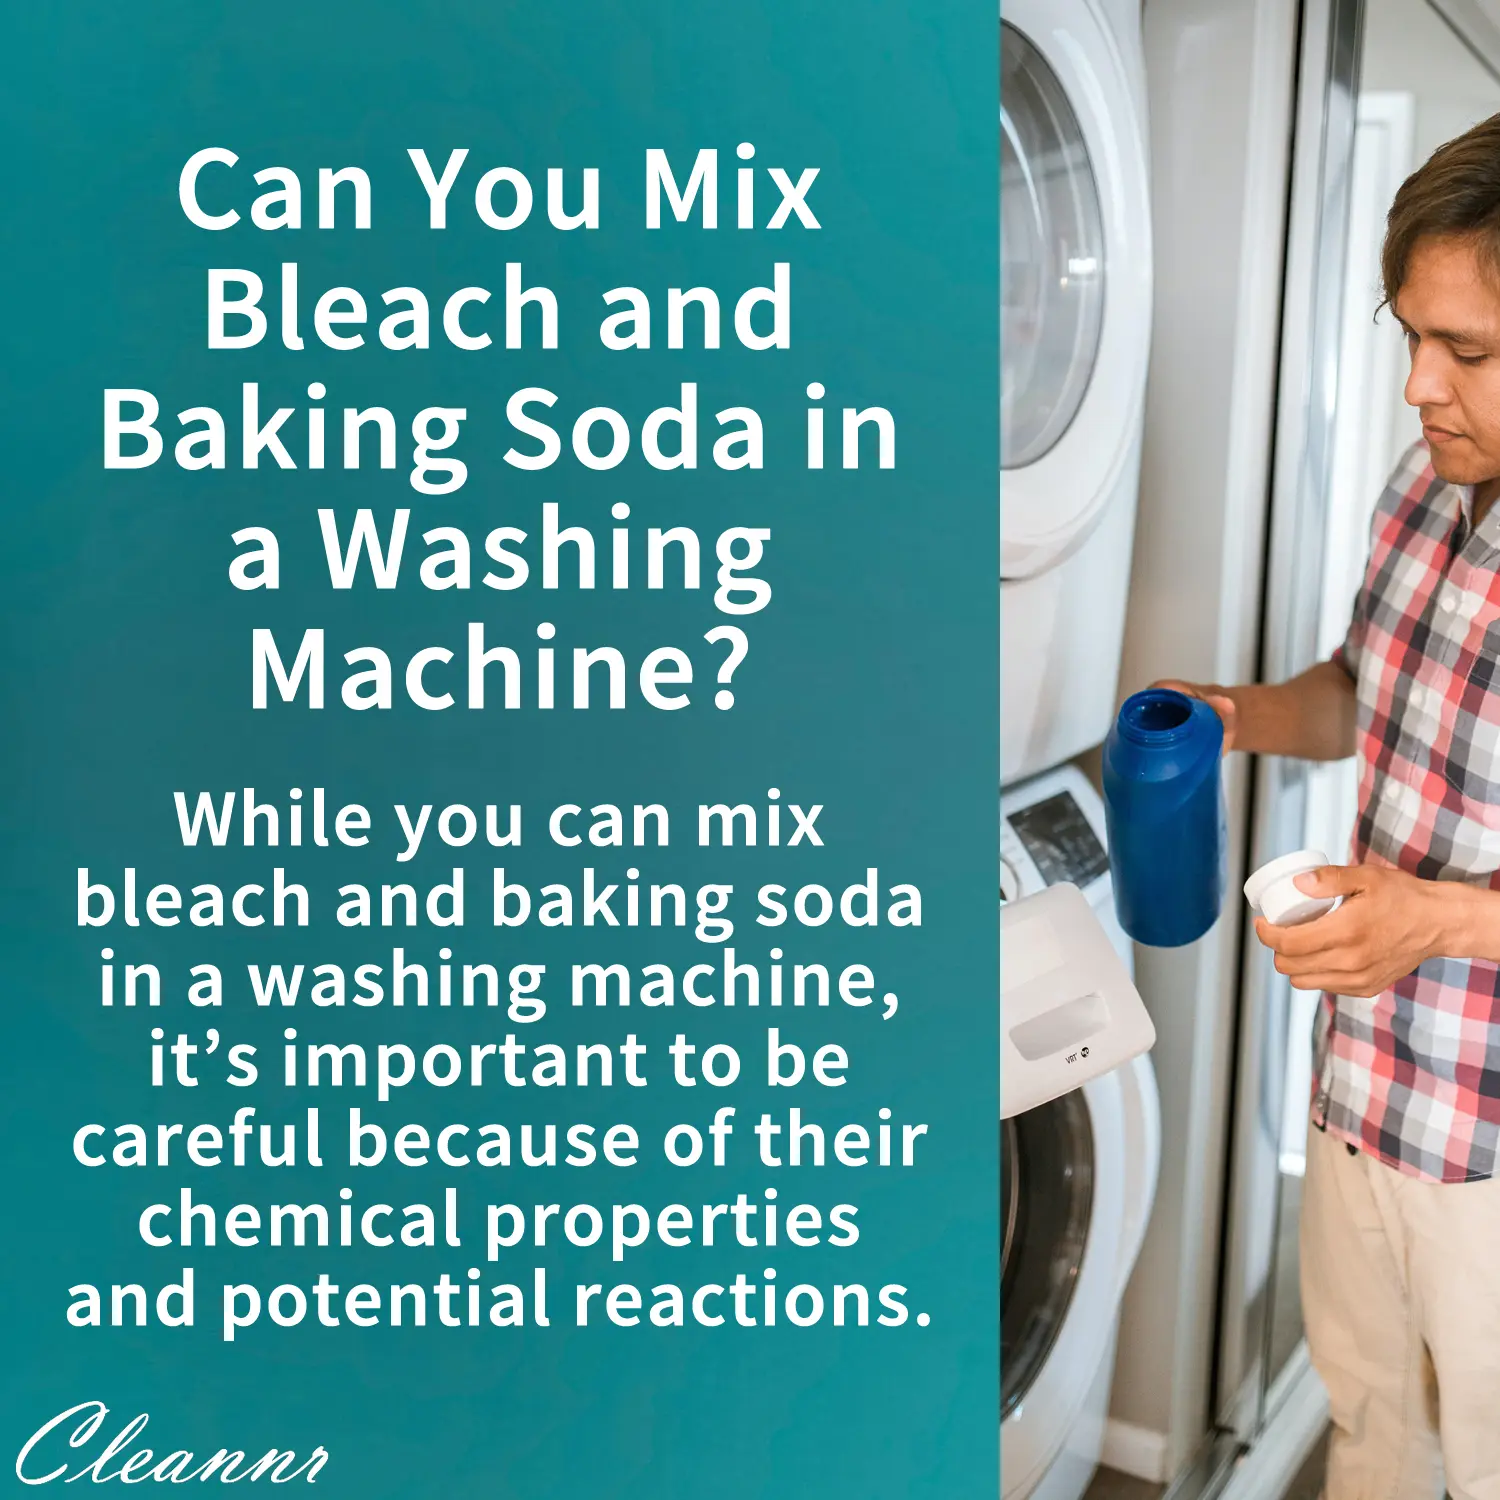 Can You Mix Bleach and Baking Soda in a Washing Machine